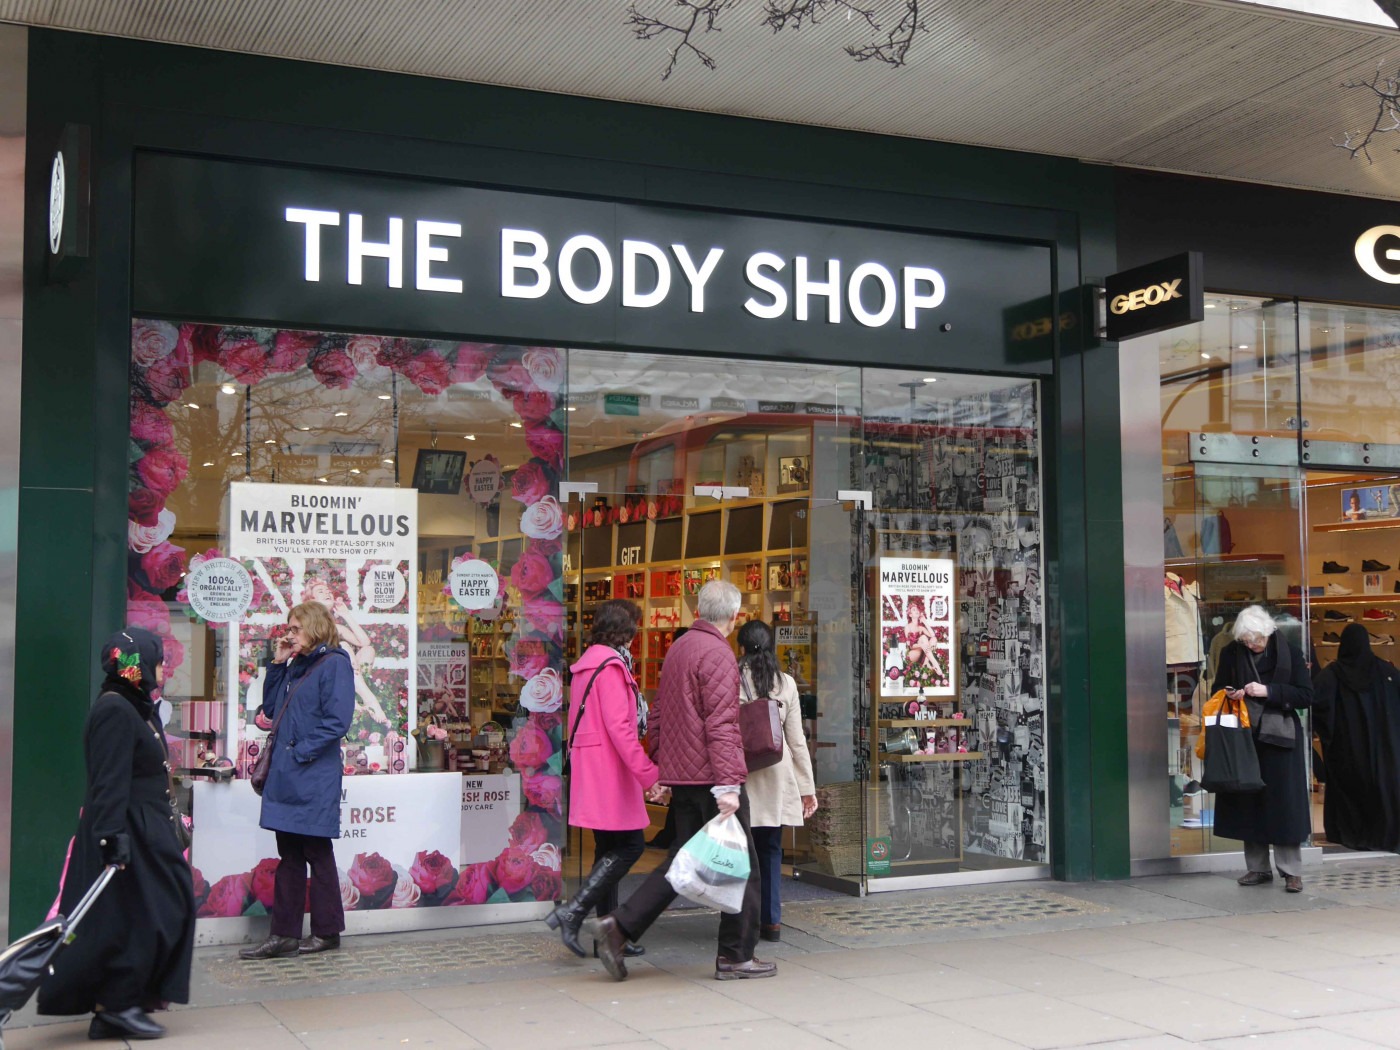 An outlet of The Body Shop on a busy high street